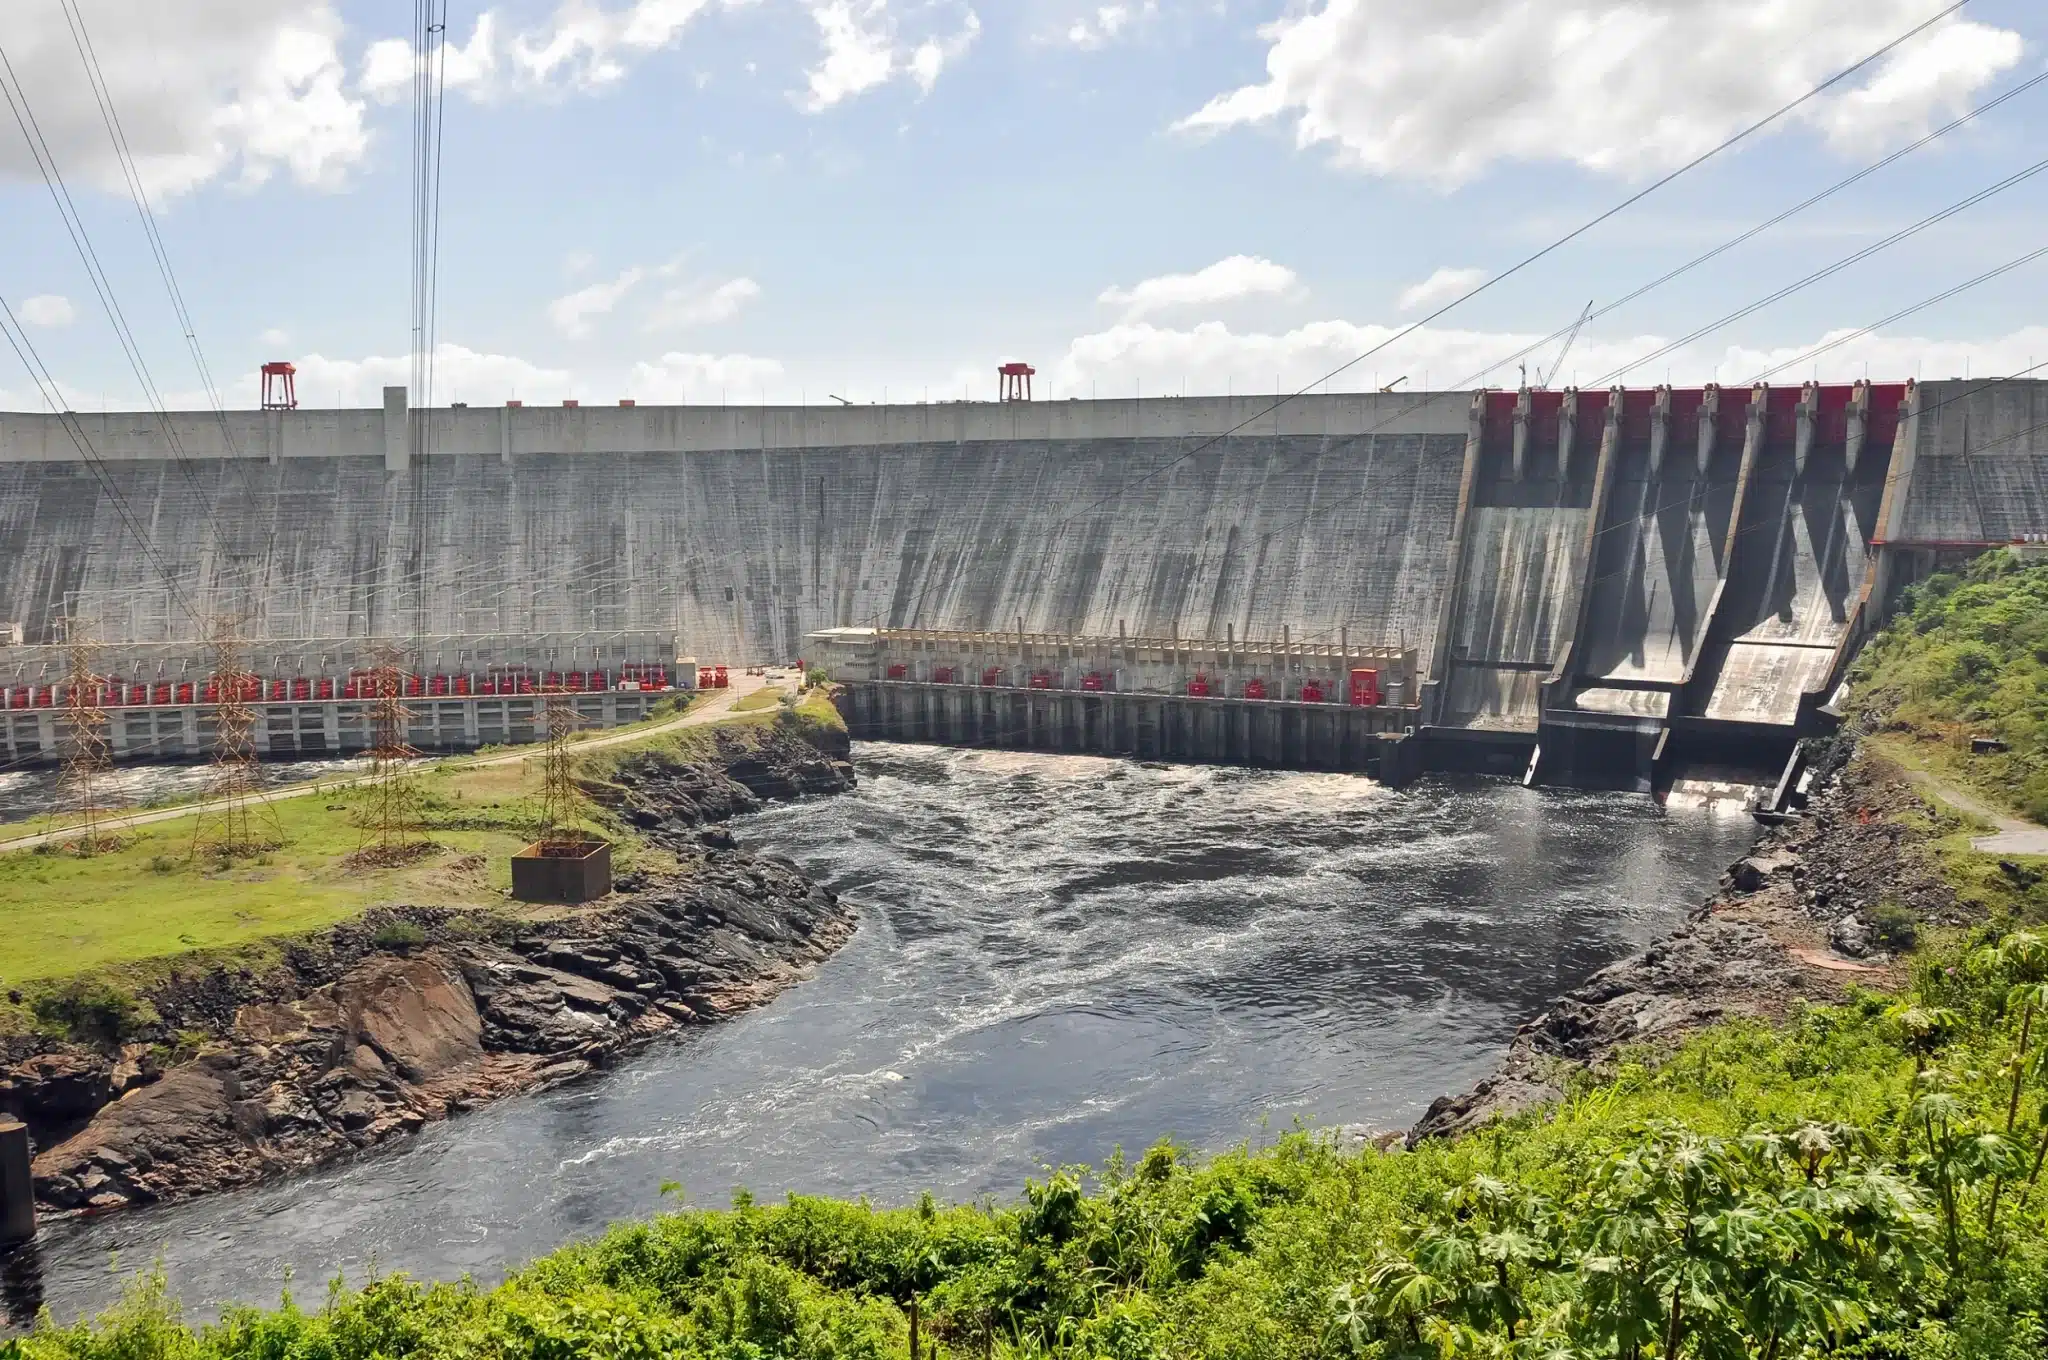 The Guri hydroelectric power plant, located in Bolívar State, Venezuela, on the Caroni River. File photo.